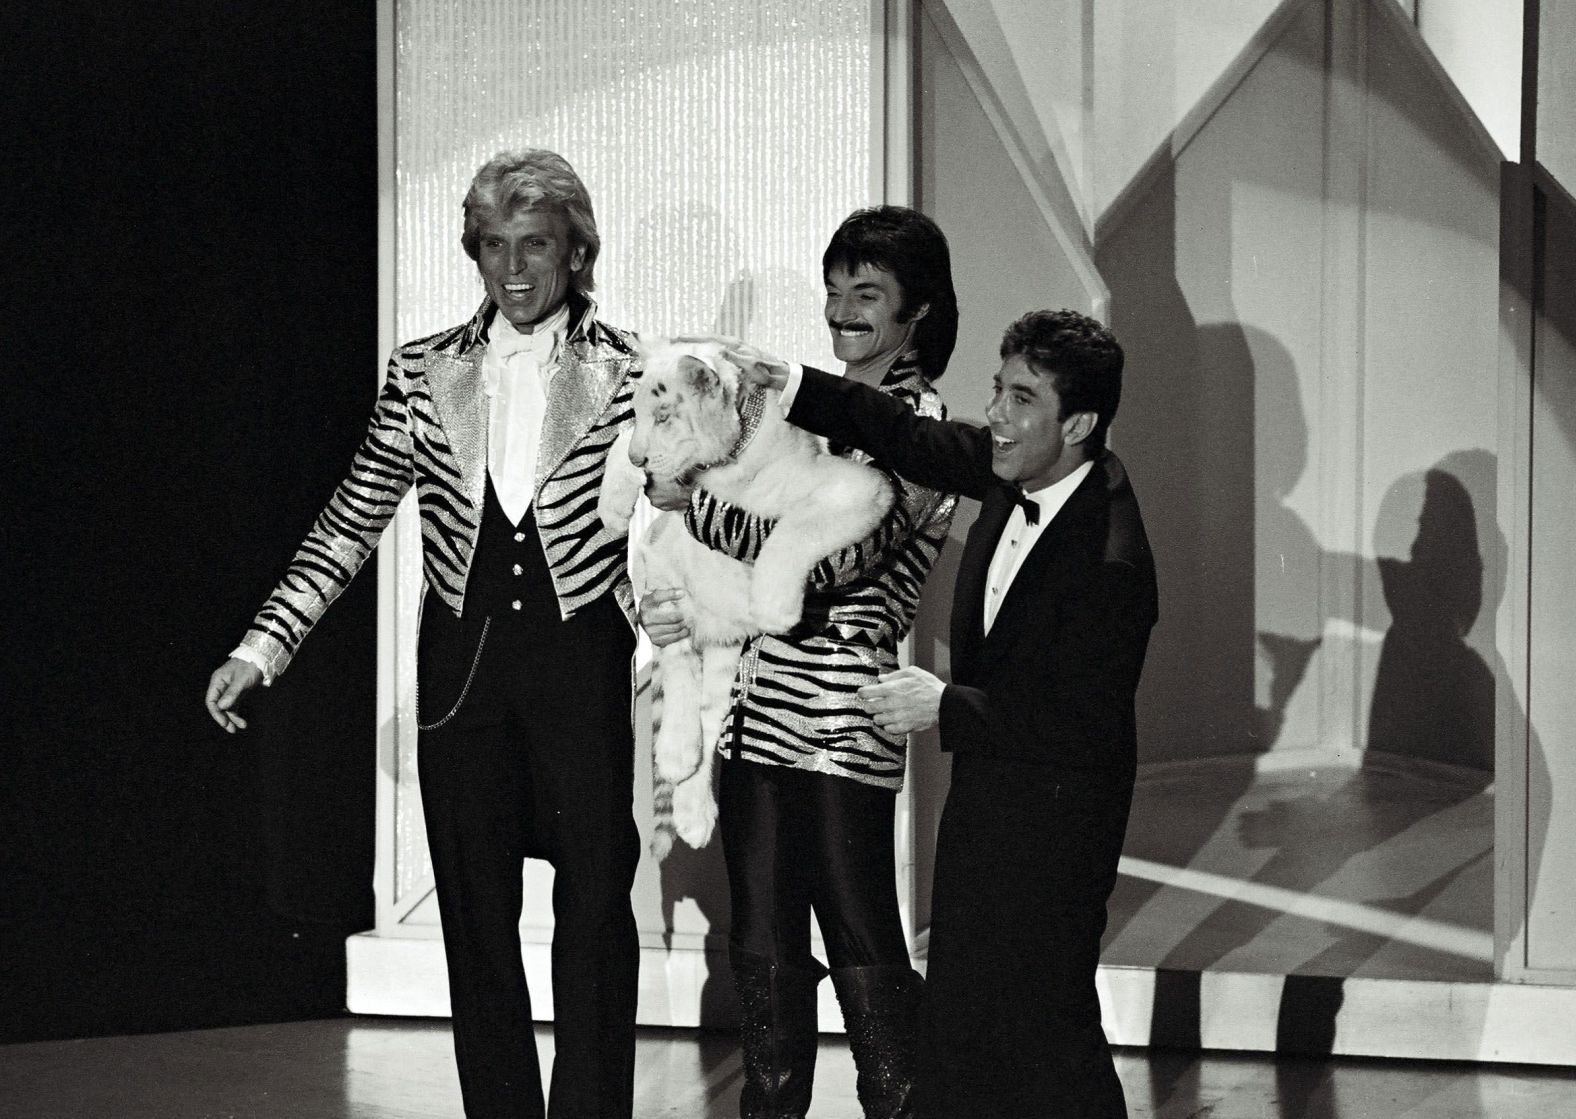 The duo performs live on television in 1983.